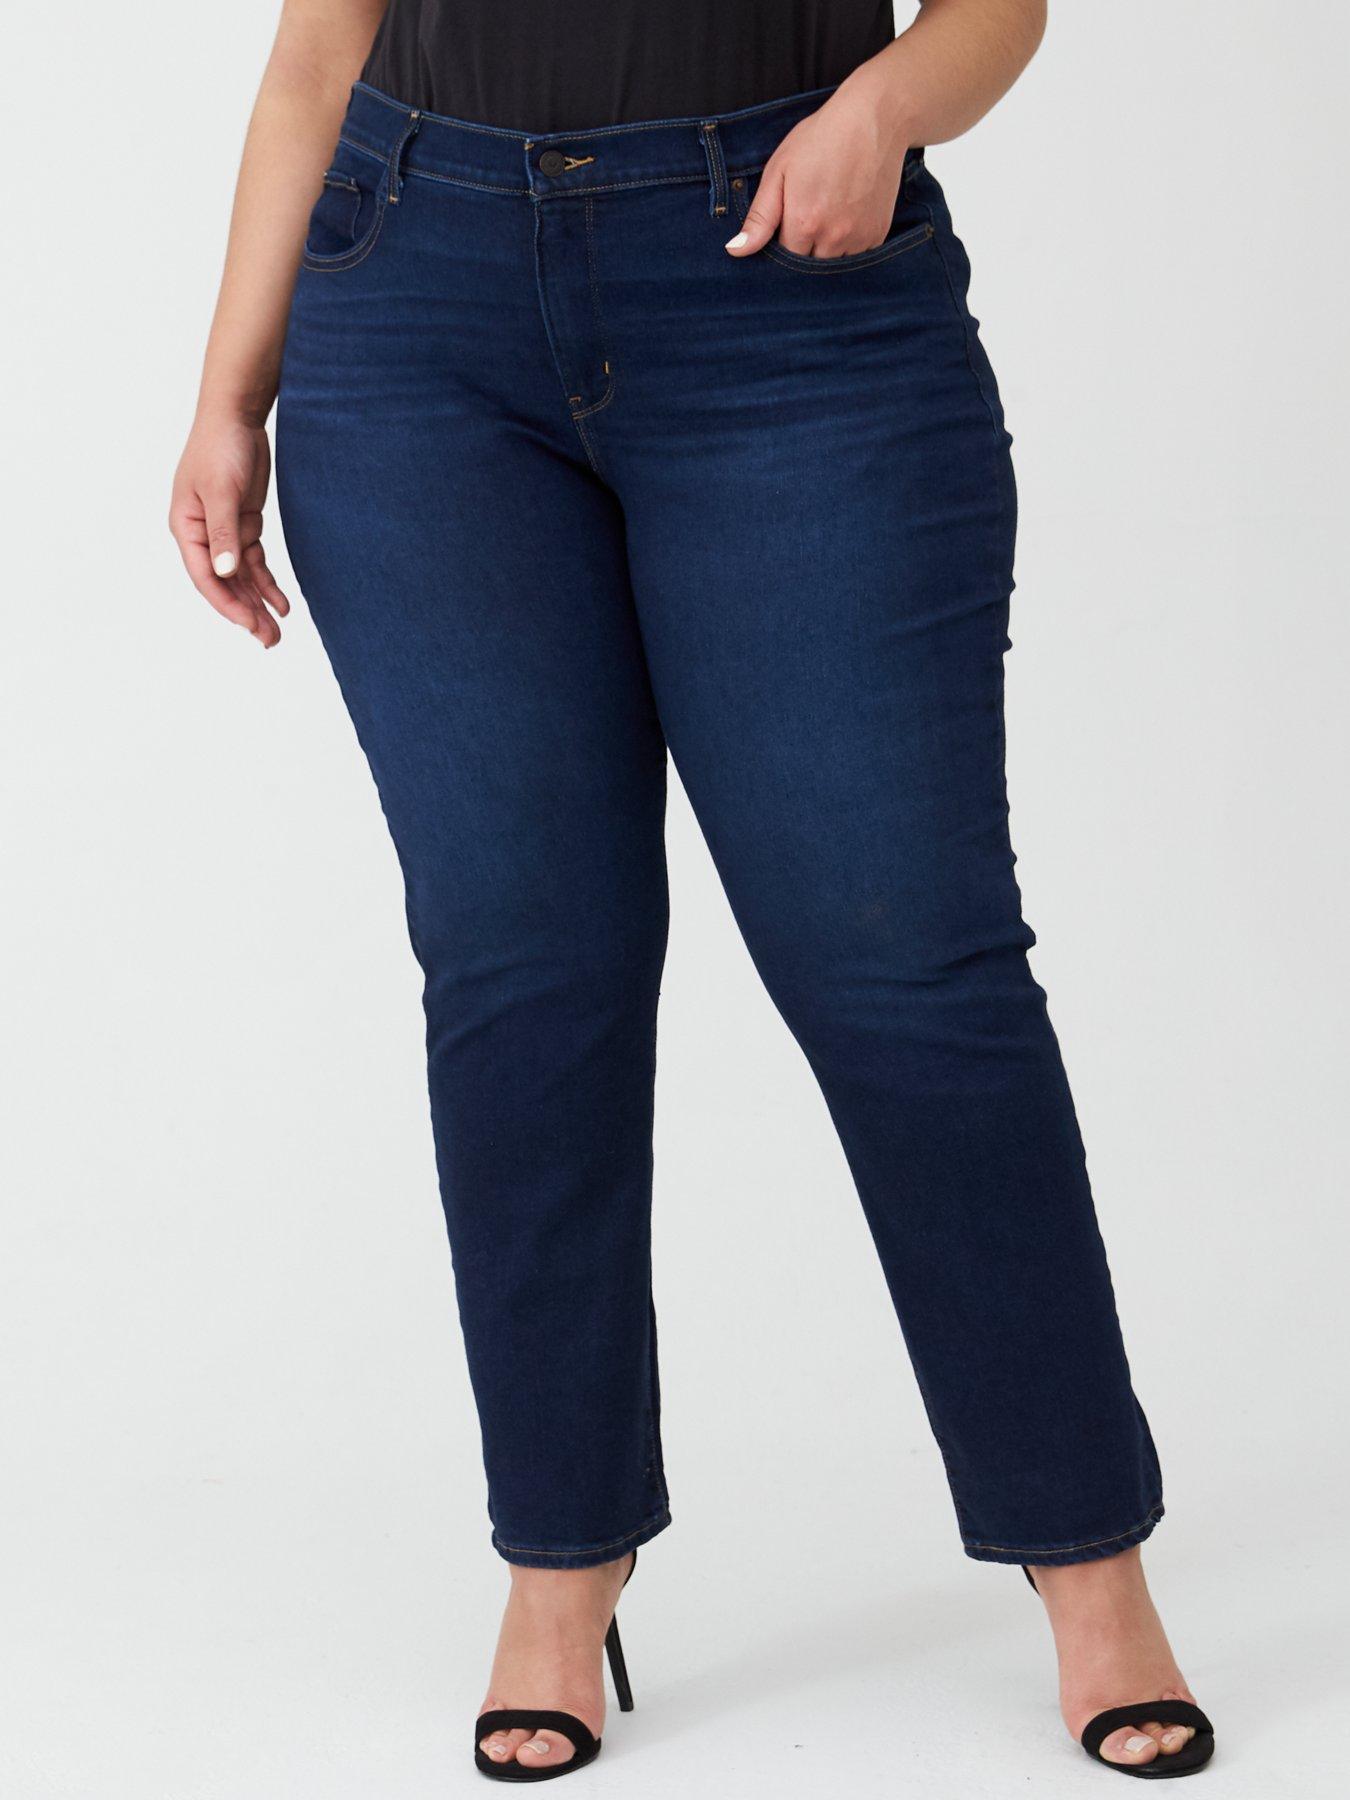 levi's 314 shaping straight jeans plus size